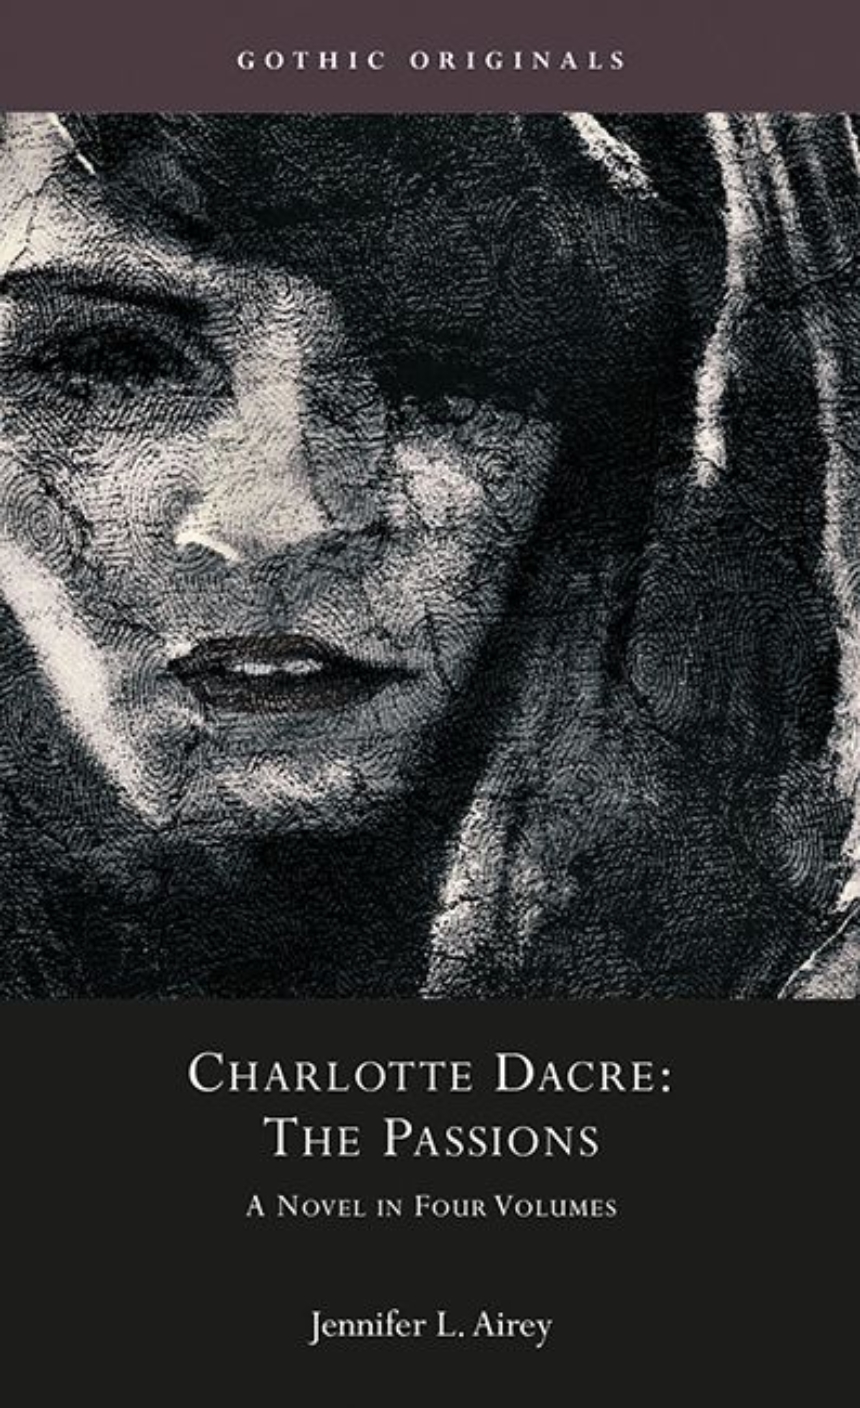 Charlotte Dacre: "The Passions"